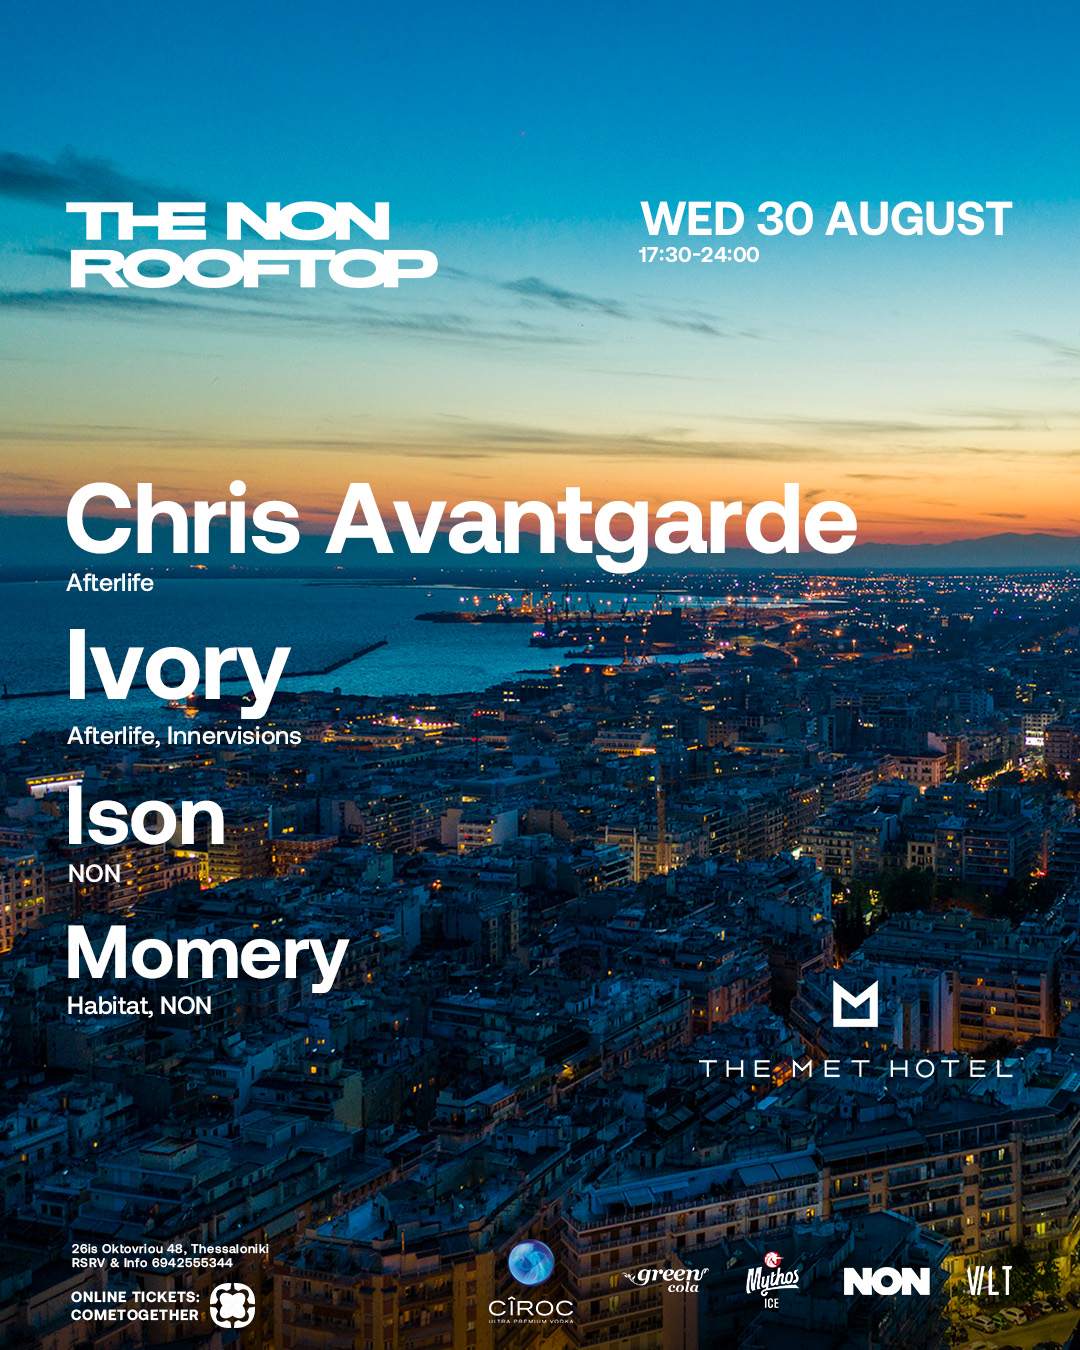 NON ROOFTOP pres. Chris Avantgarde, Ivory, Ison, Momery - Página frontal